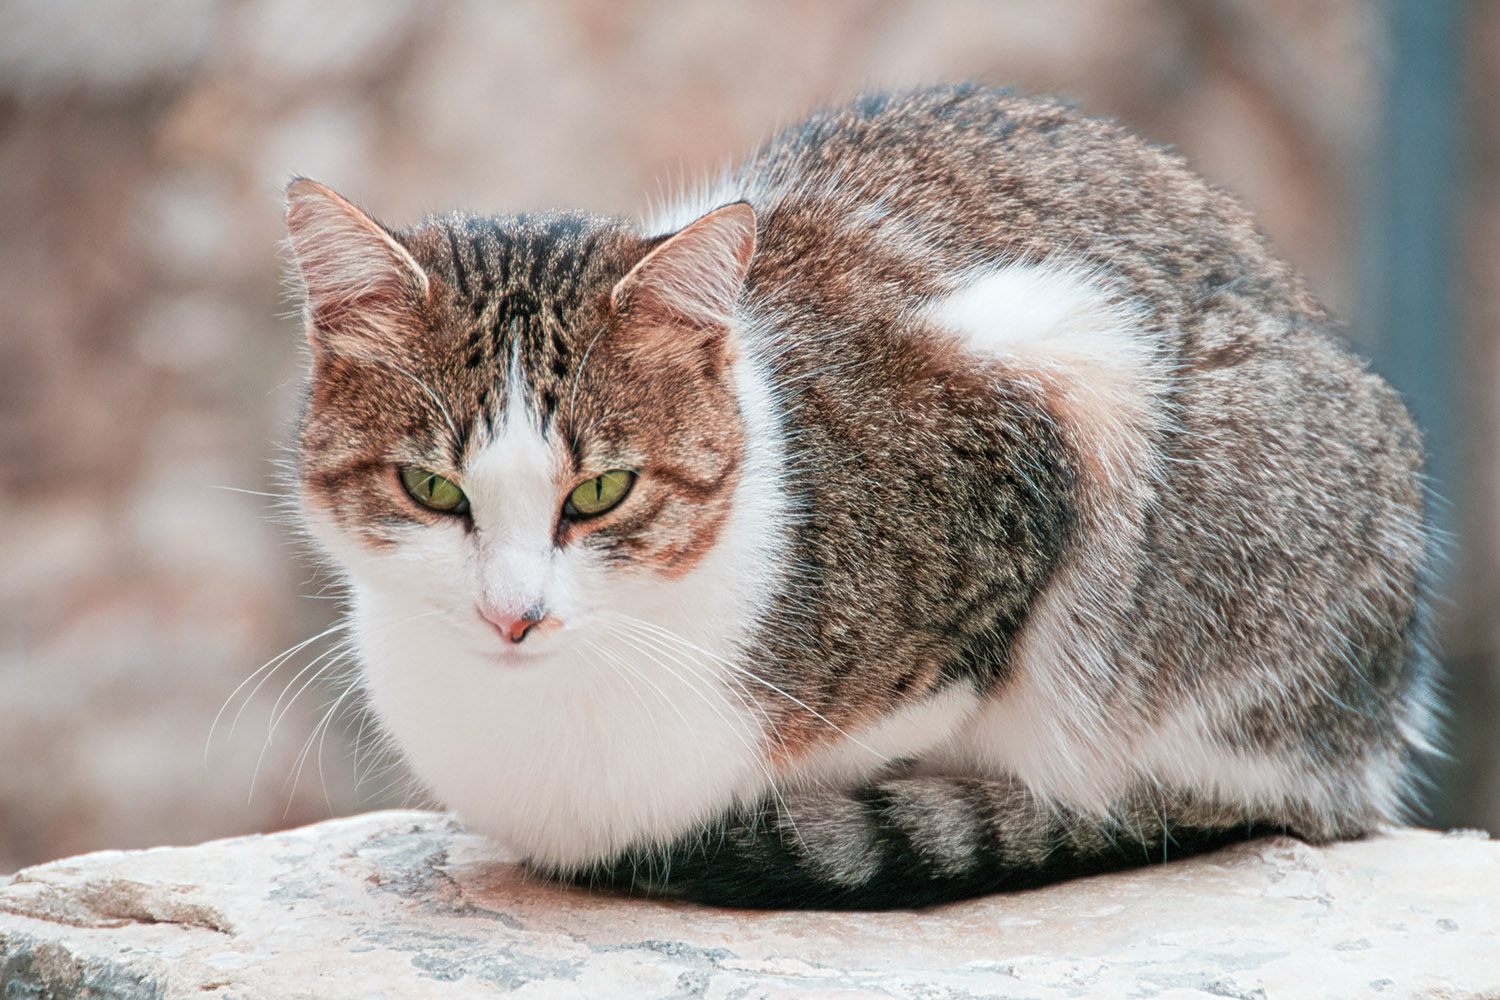 This Tourrettes-sur-Loup cat is giving us a don't-get-any-closer-look